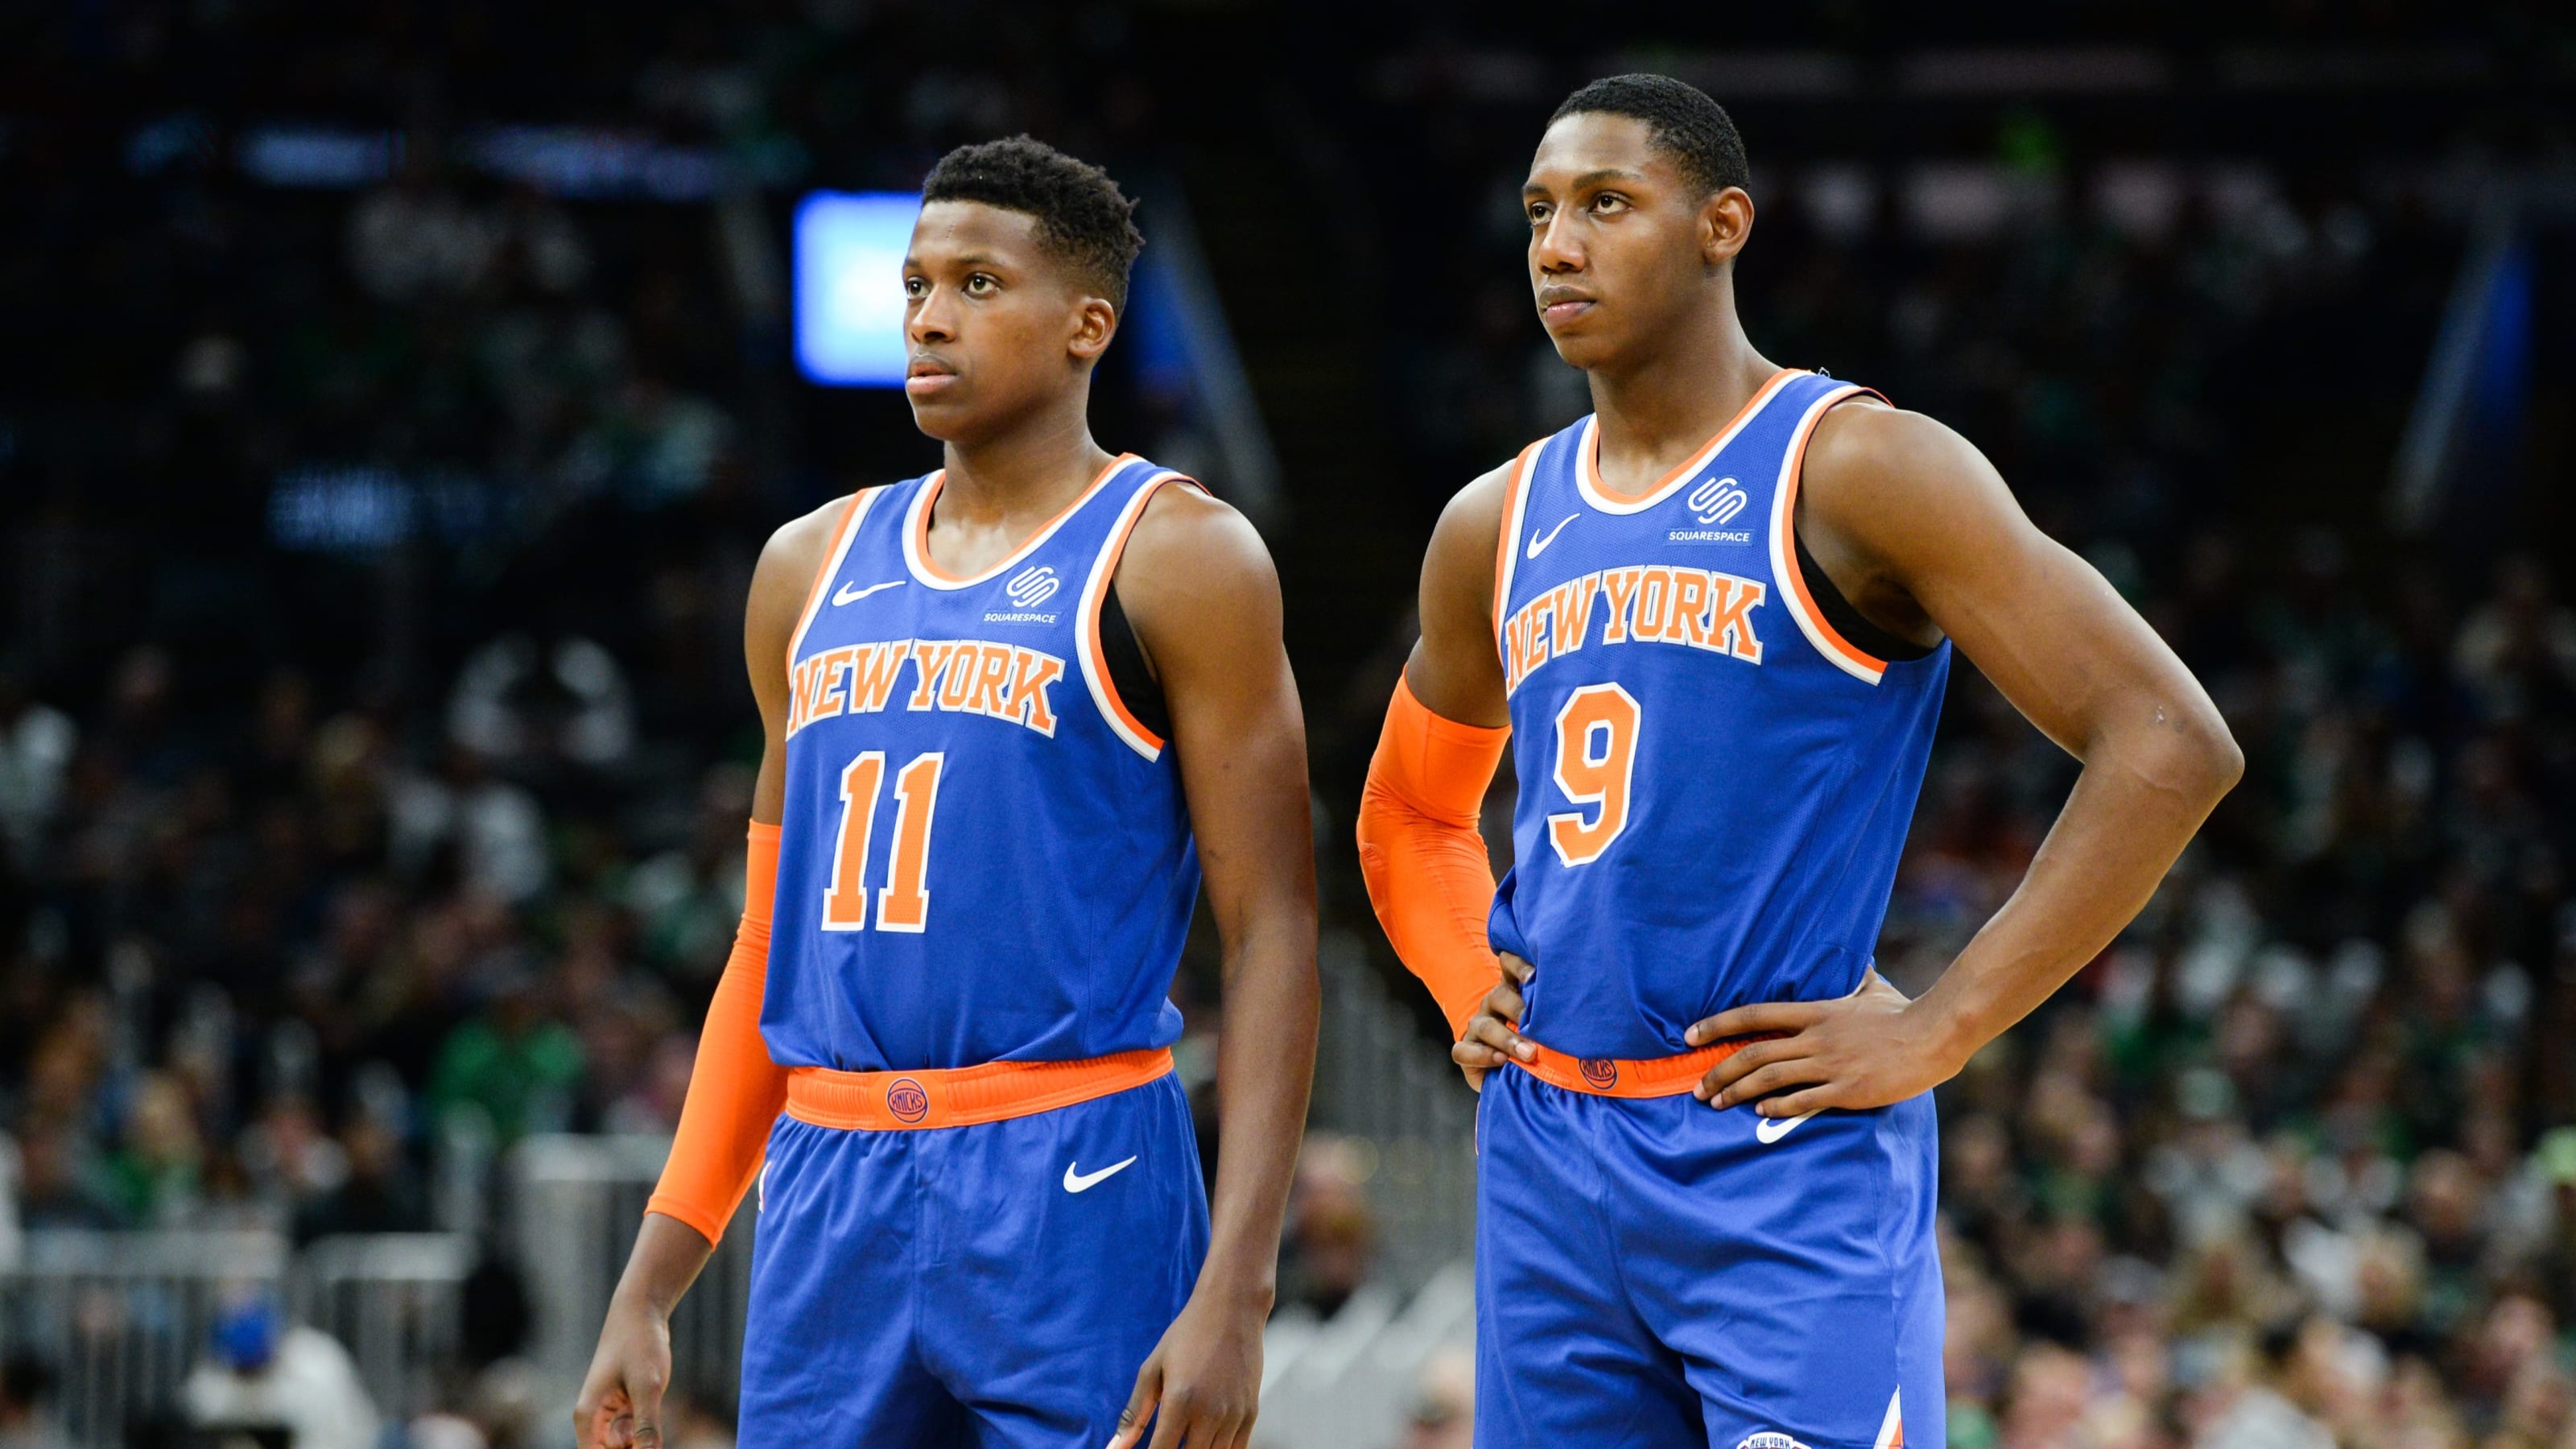 The New York Knickerbockers, more commonly referred to as the New York Knicks, are an American professional basketball team based in the New York City...